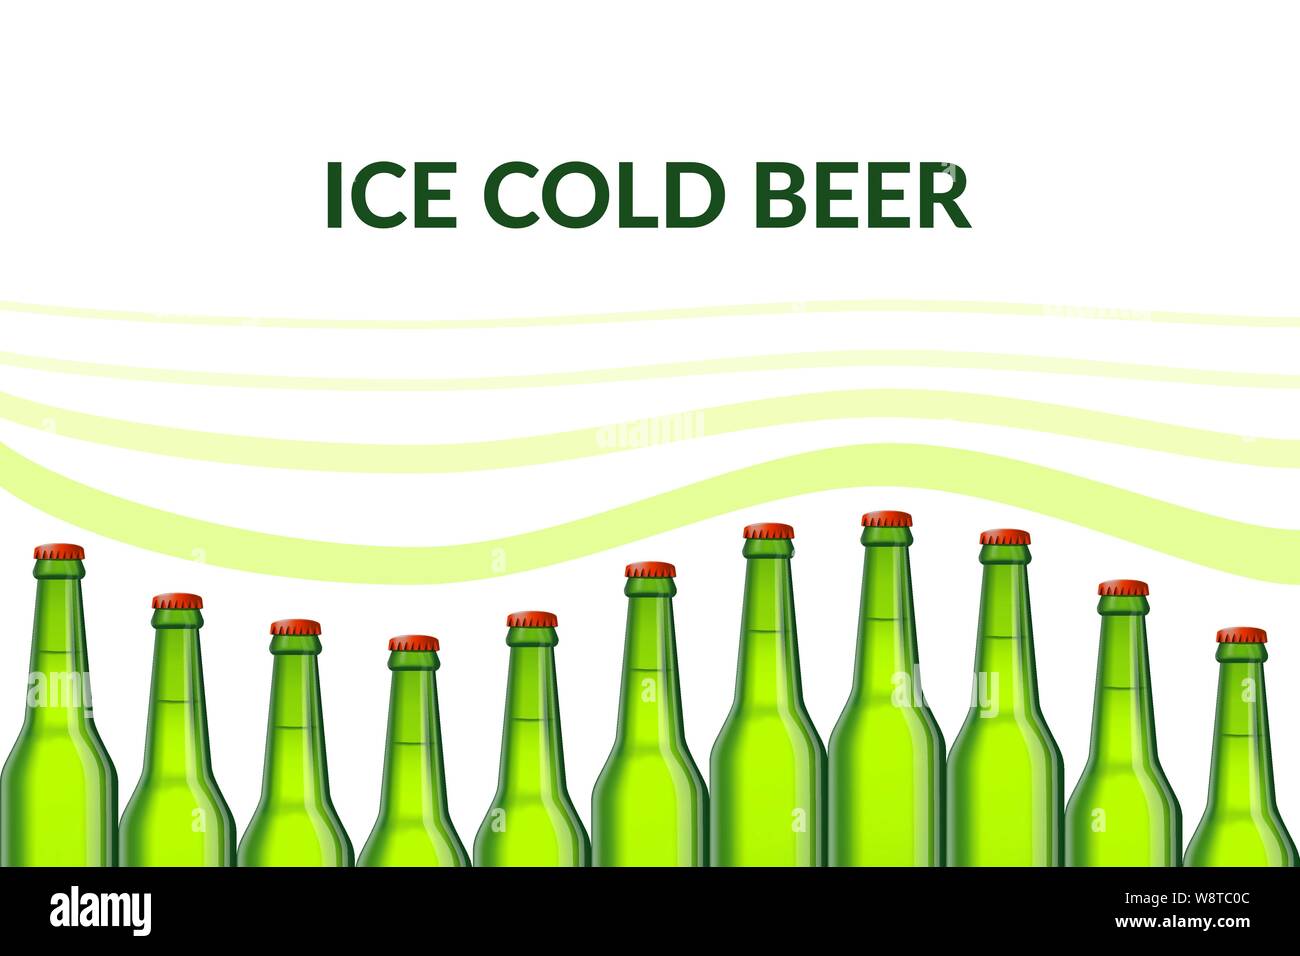 Some beer bottles moving like waves. Design concept for beer or pub advertisement. Can be placed on advertisement board or banner Stock Vector